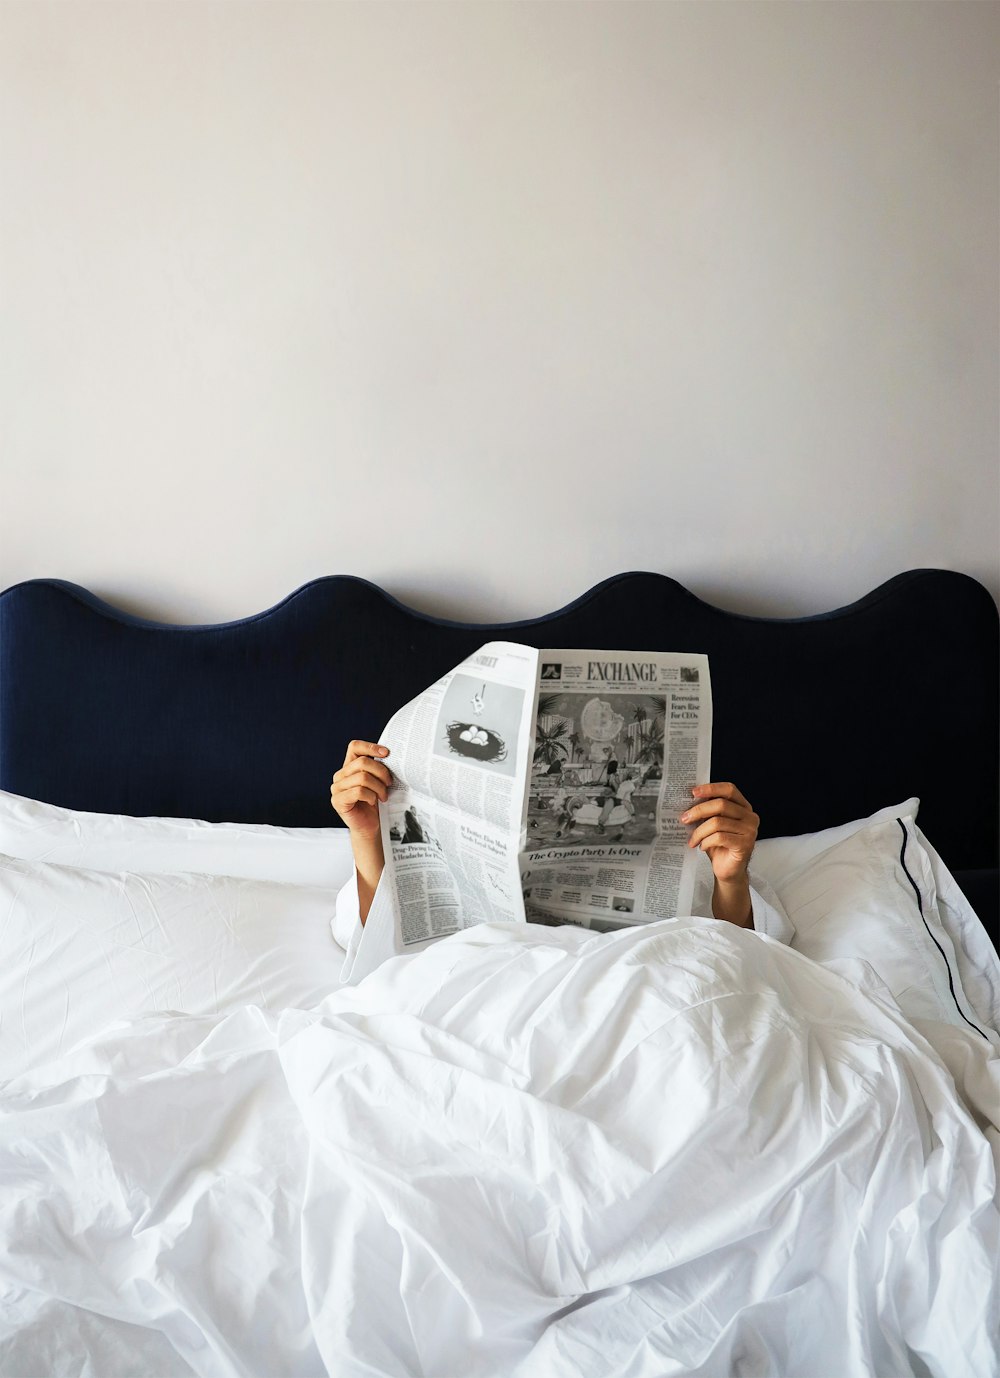 a person lying on a bed reading a newspaper